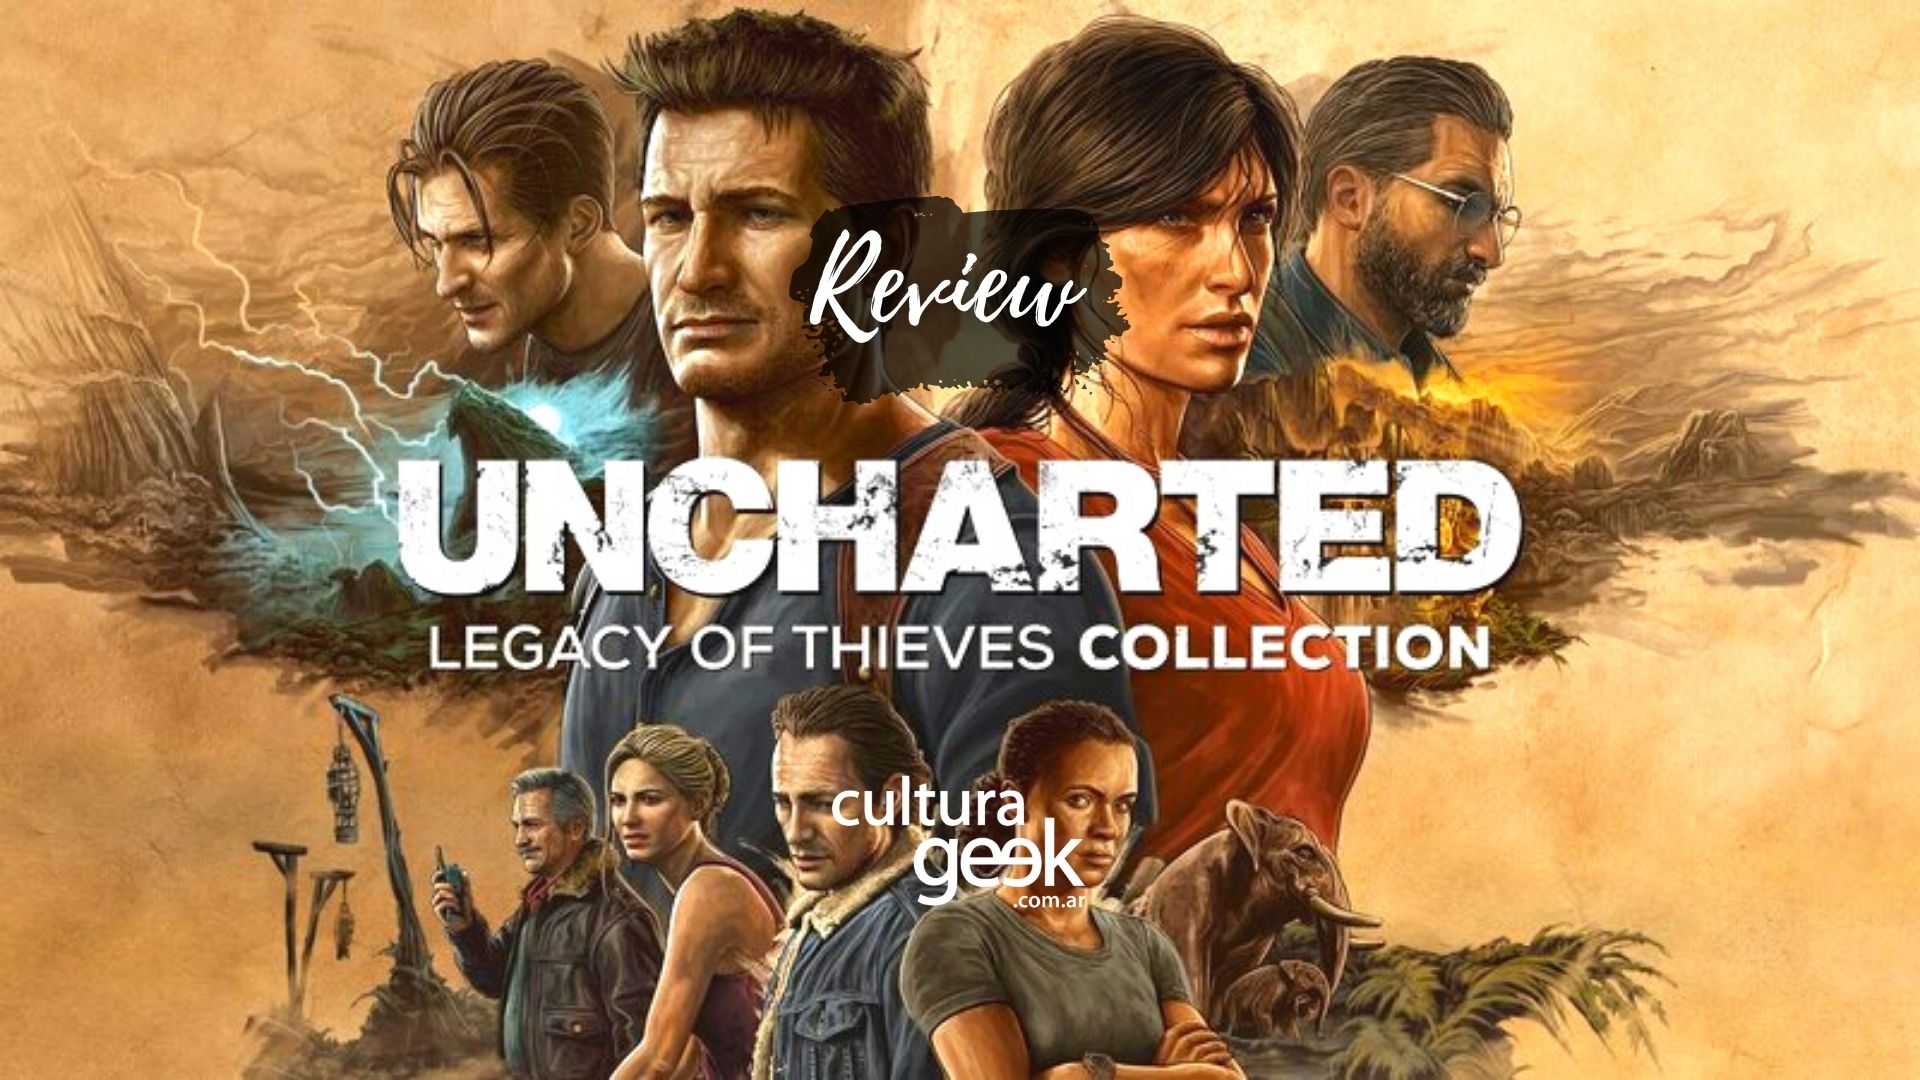 Review Uncharted: Legacy of Thieves Collection